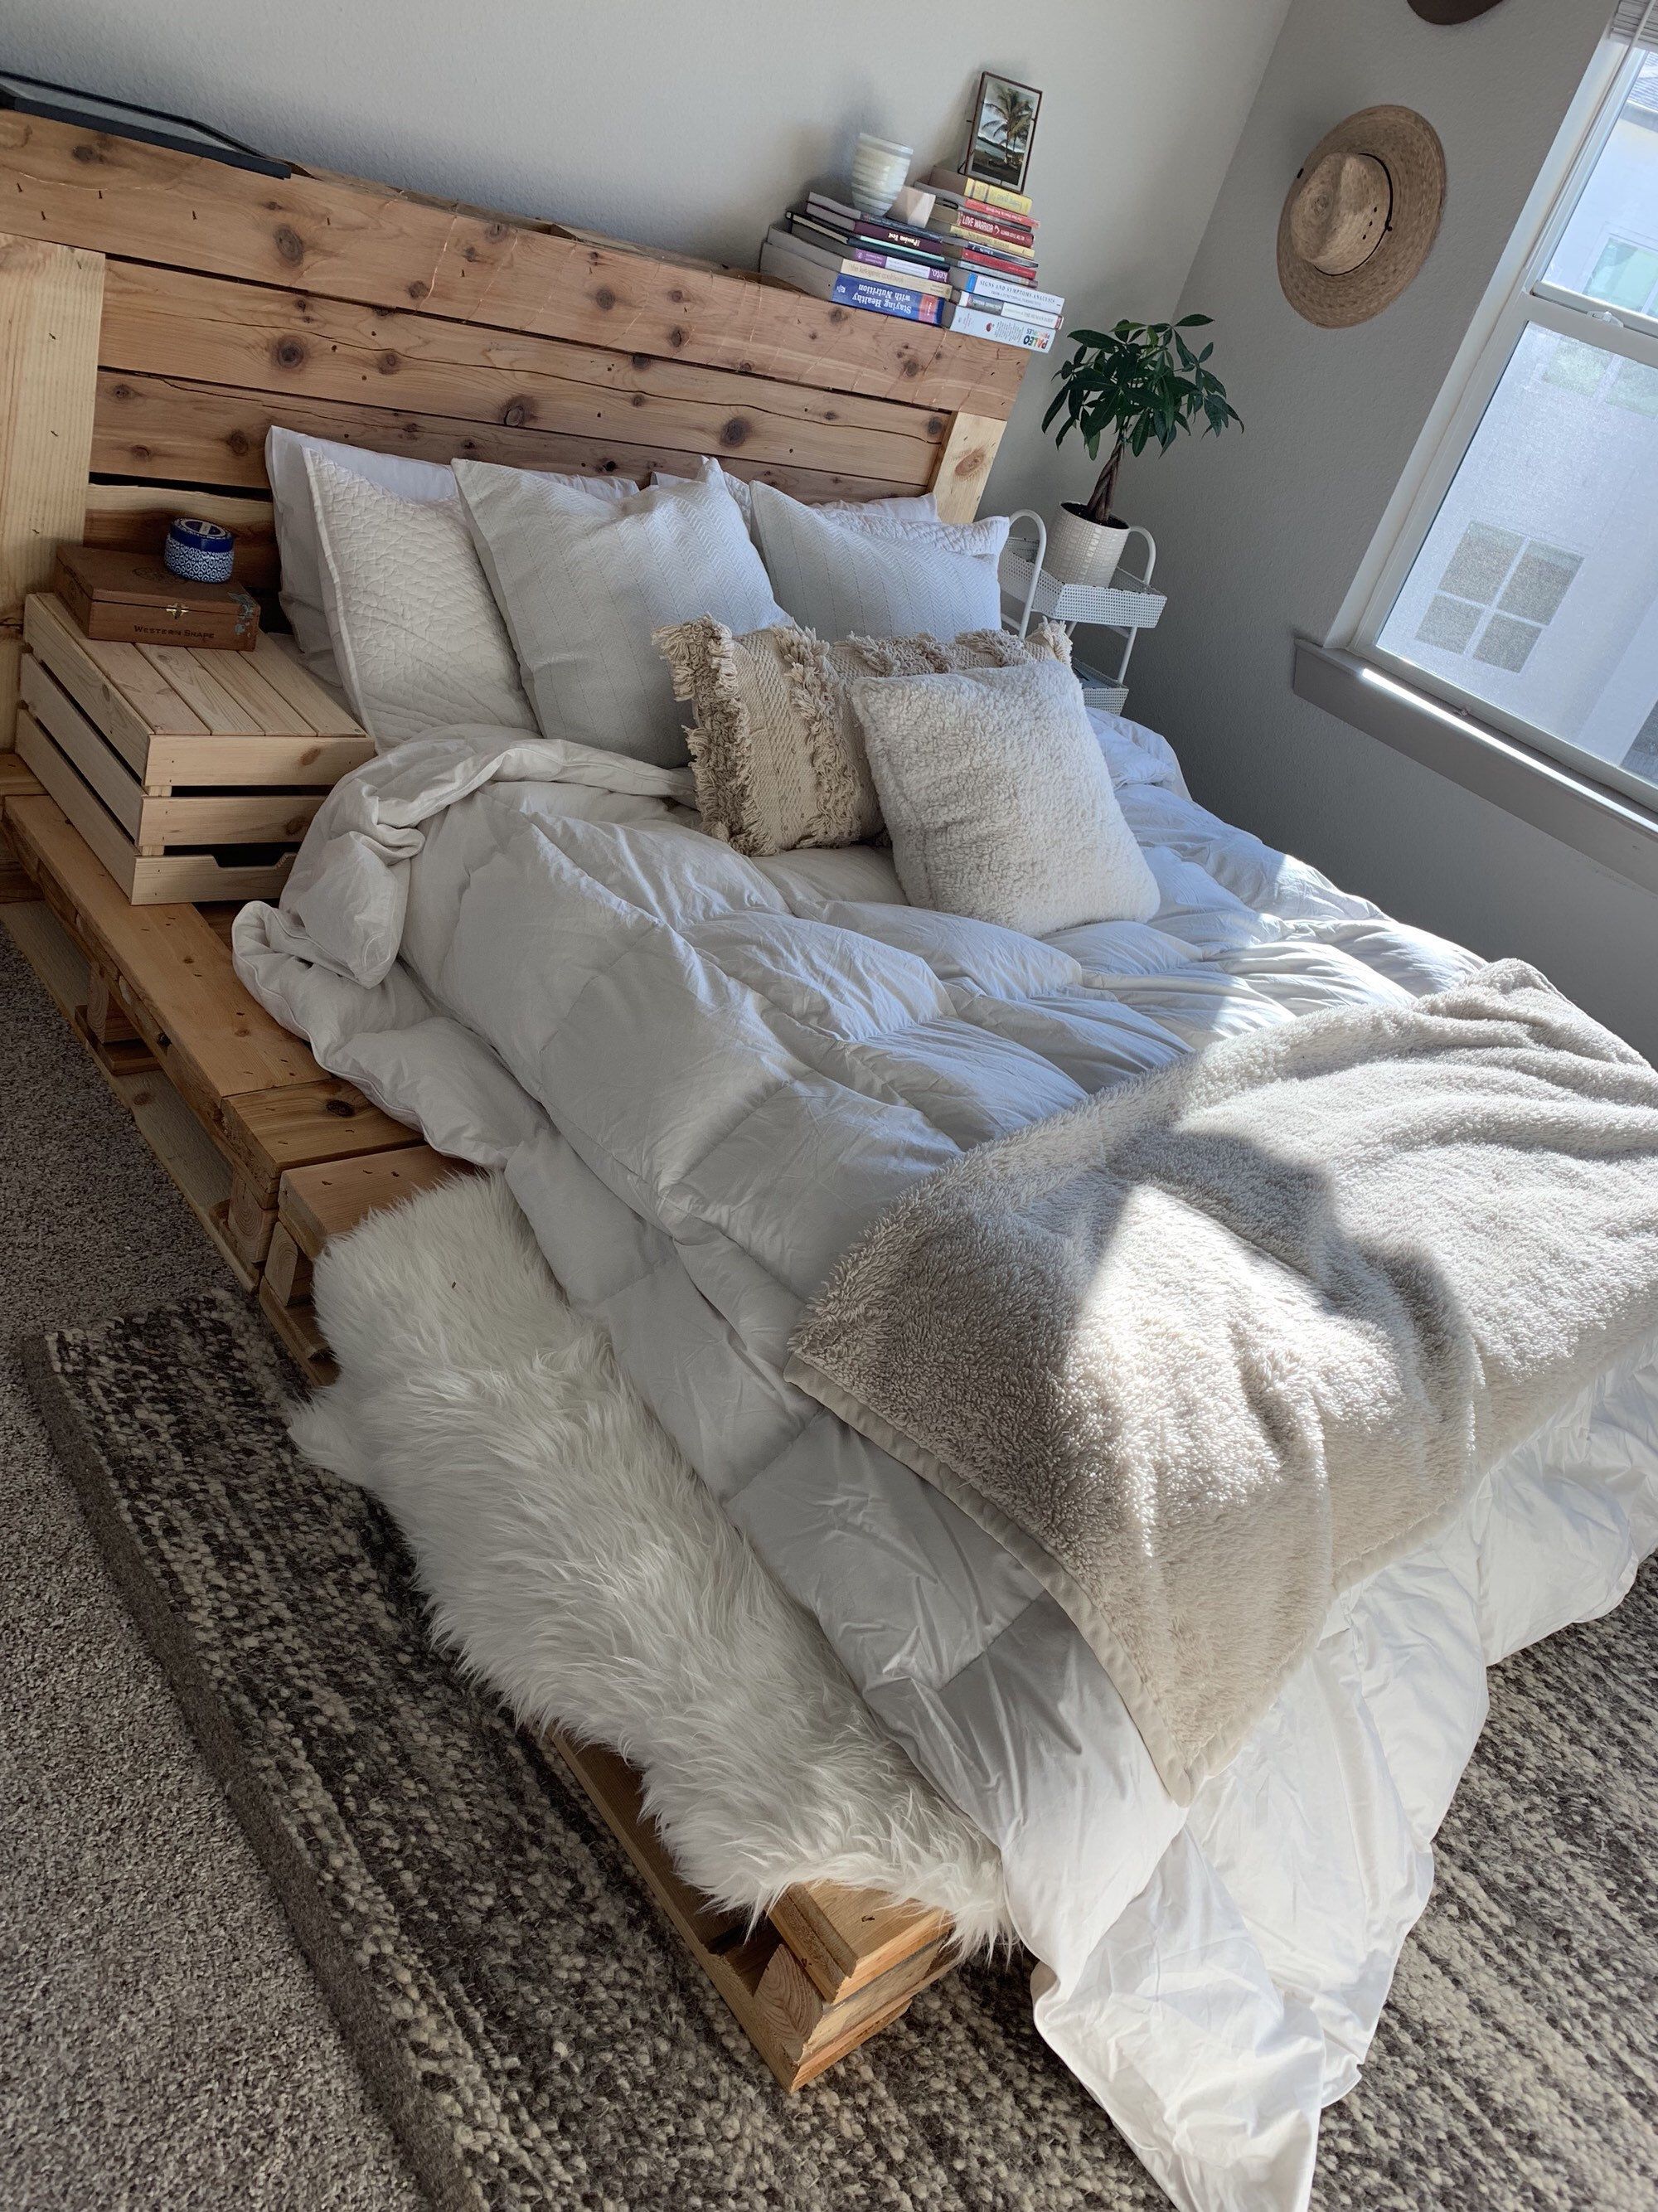 Pallet Bed - The Oversized Queen - Includes Headboard and Platform - Pallet Bed - The Oversized Queen - Includes Headboard and Platform -   16 diy Bed Frame boho ideas